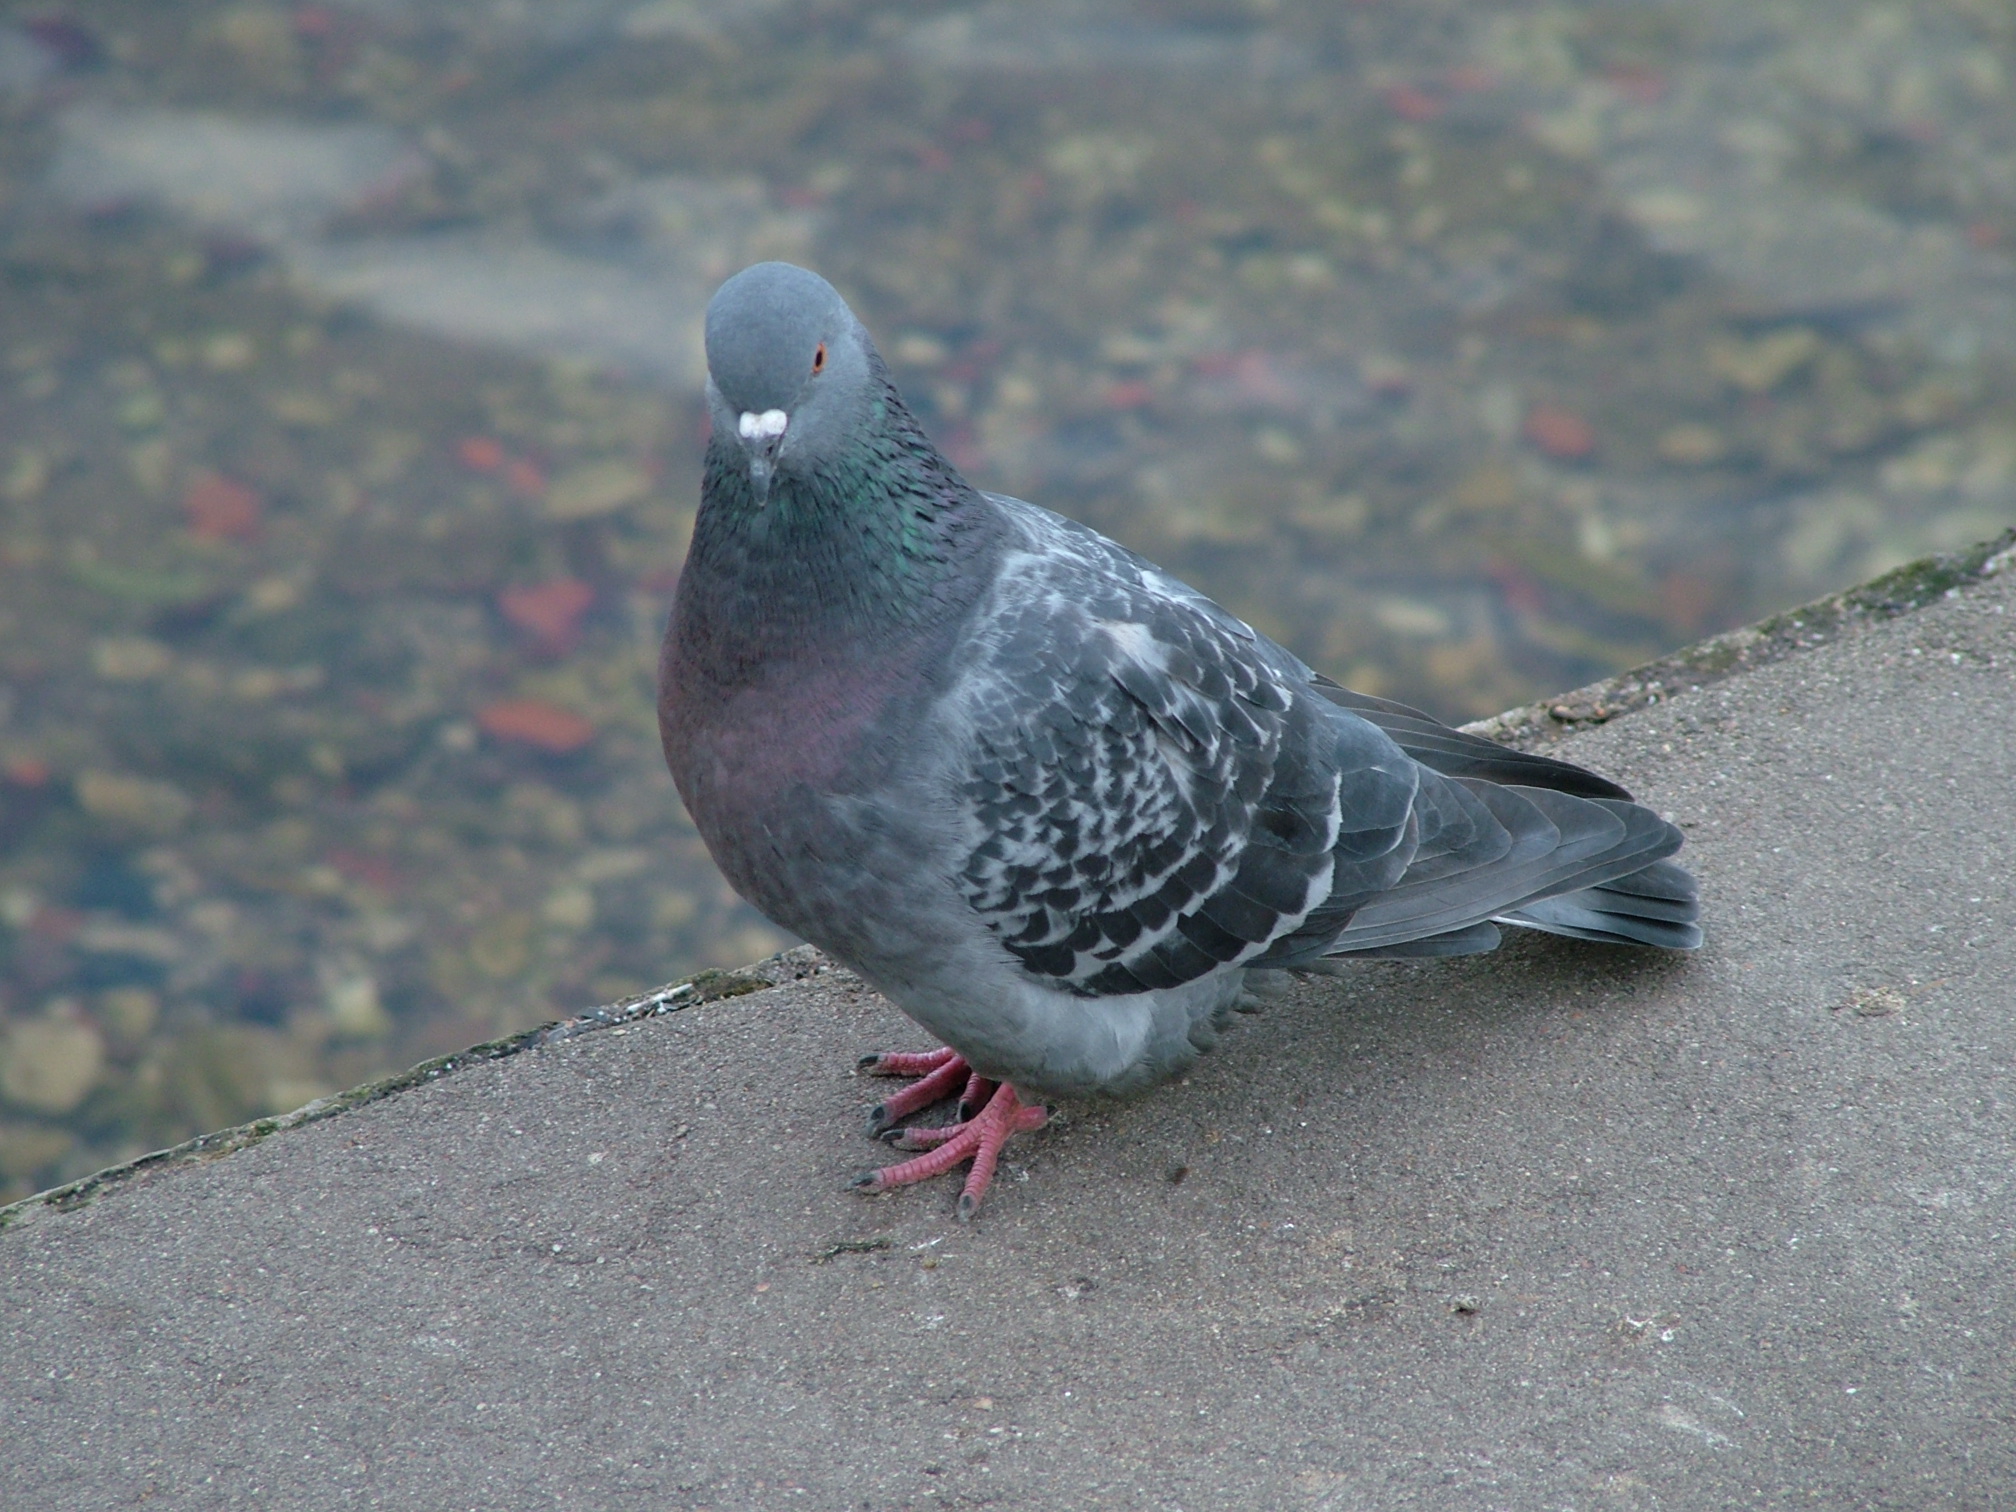 Click This Image To Download Full Resolution Pigeon - Stock Dove - HD Wallpaper 